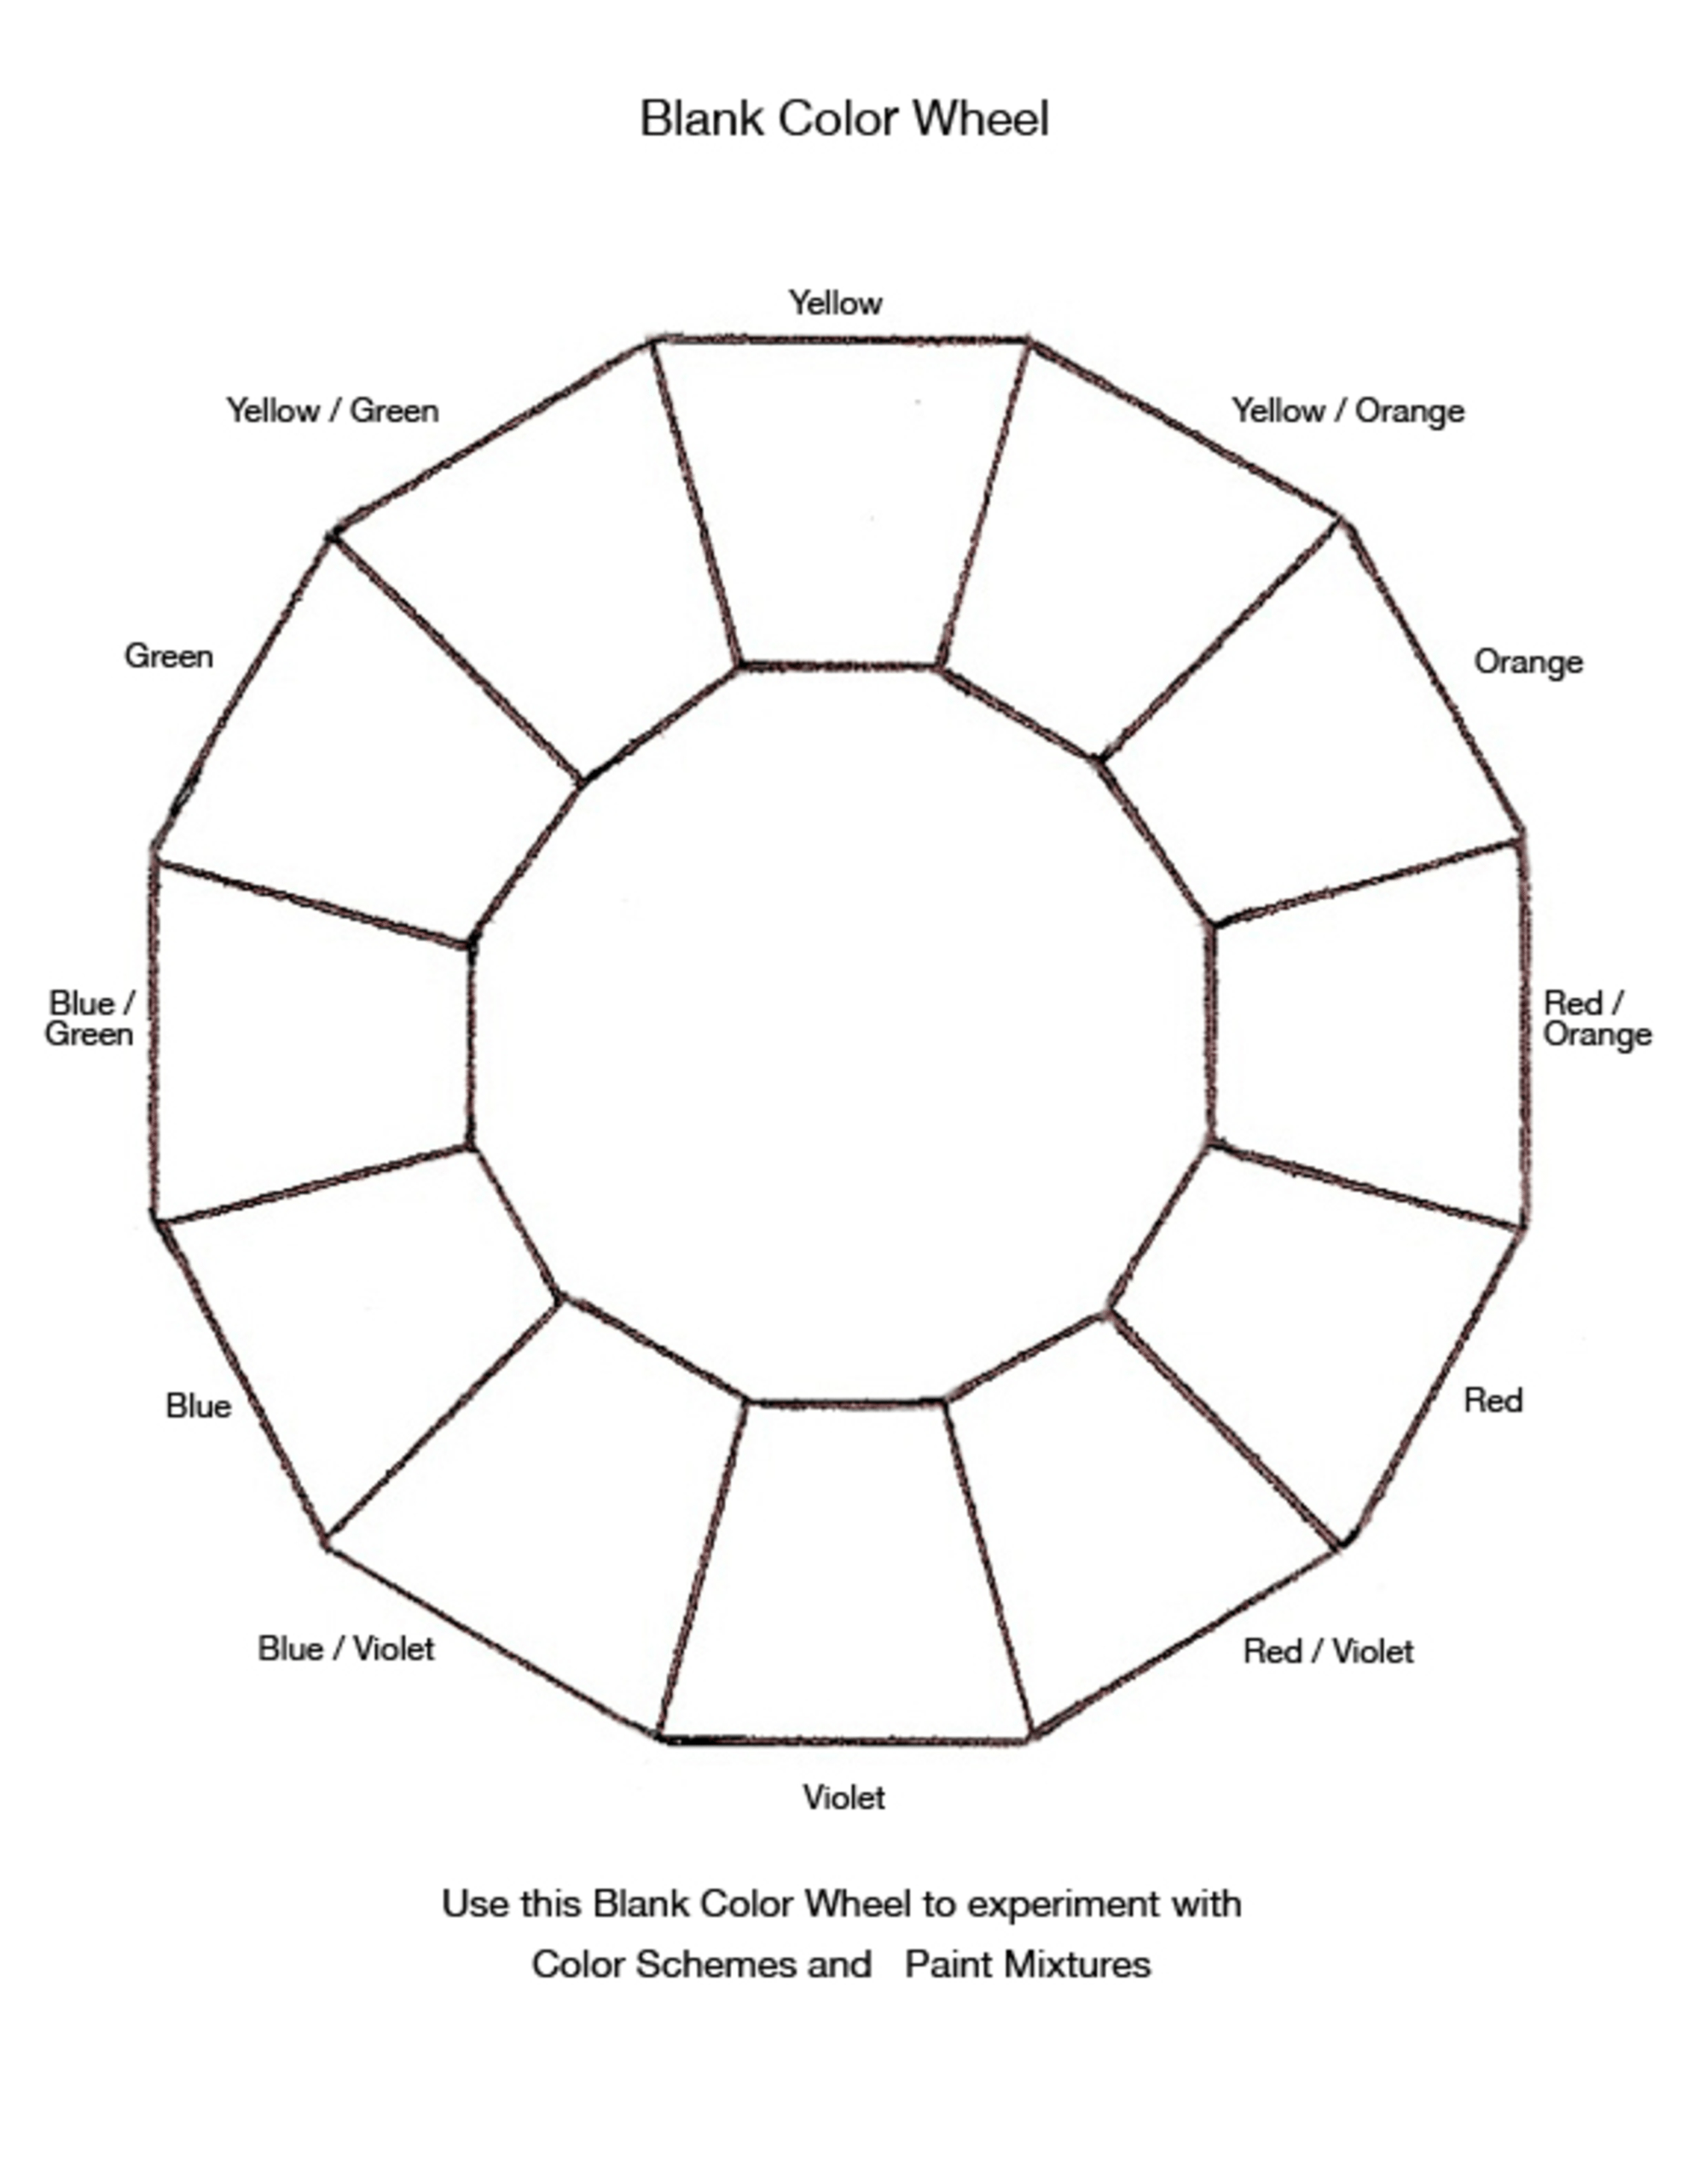 Blank Color Wheel Chart | Templates At Allbusinesstemplates With Regard To Wheel Of Life Template Blank